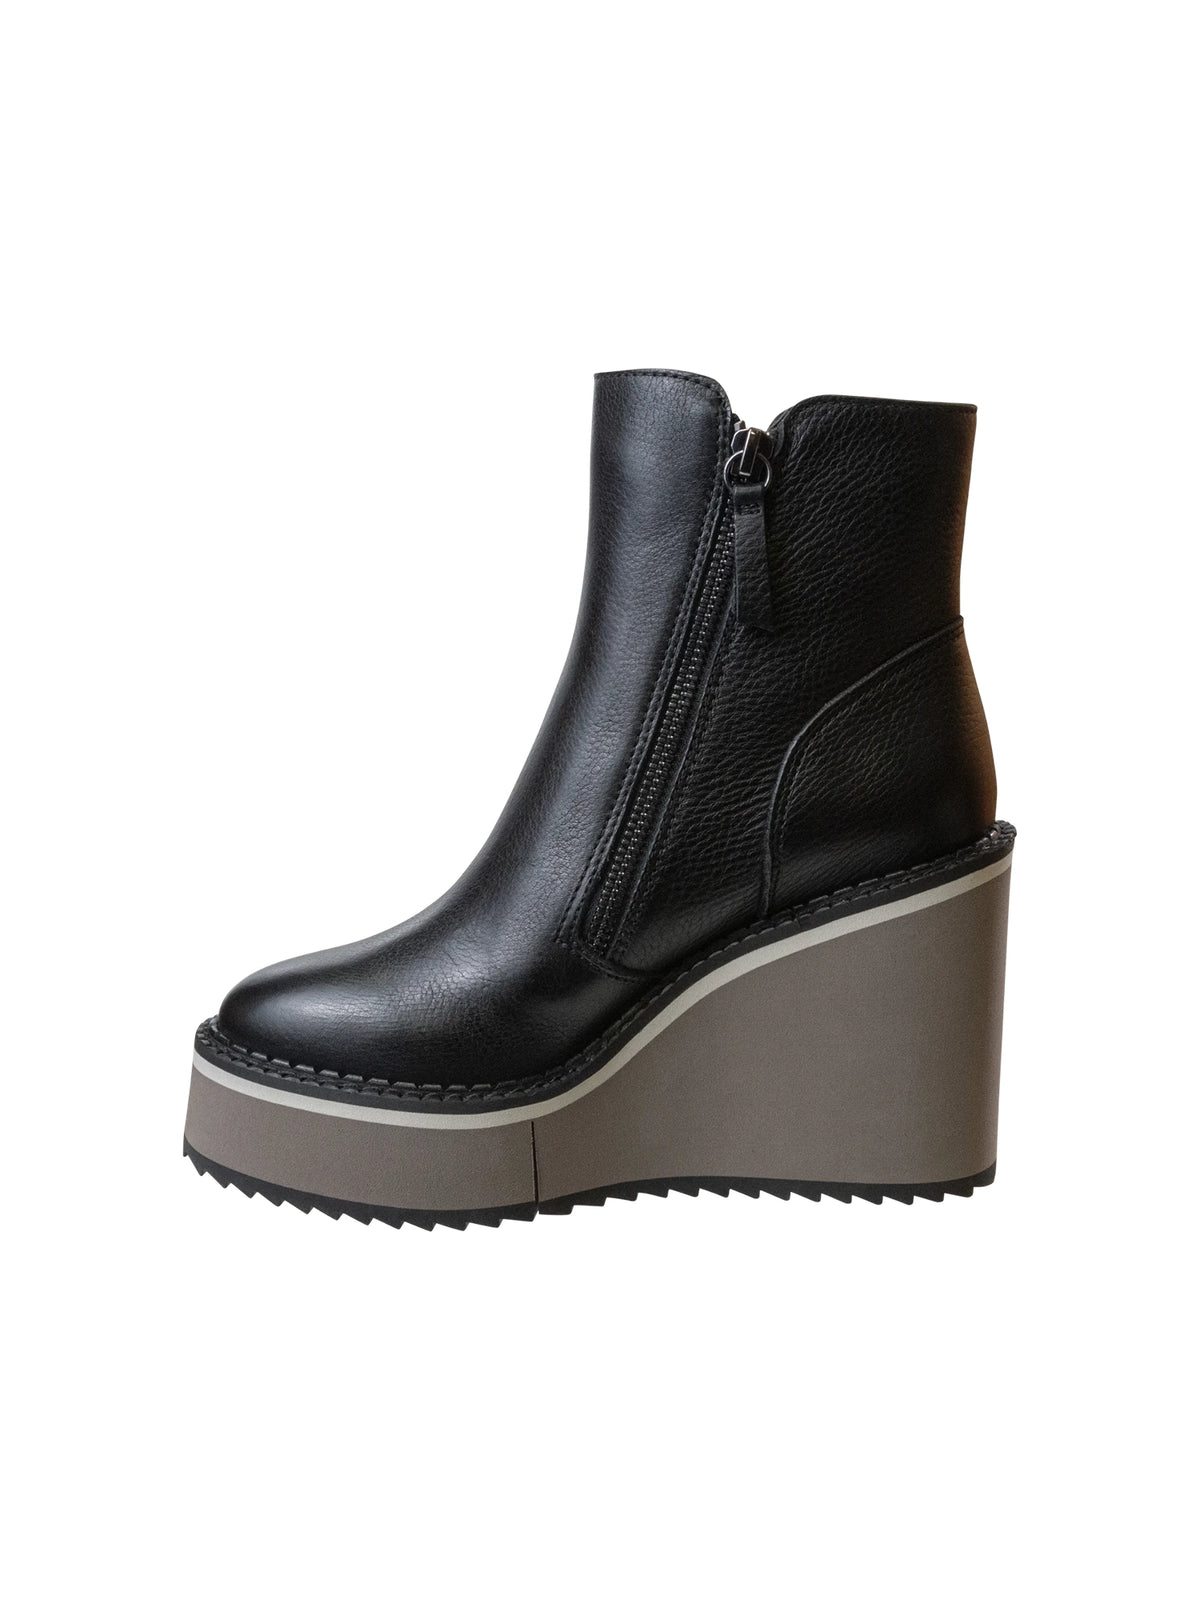 naked feet avail wedge ankle boots in black